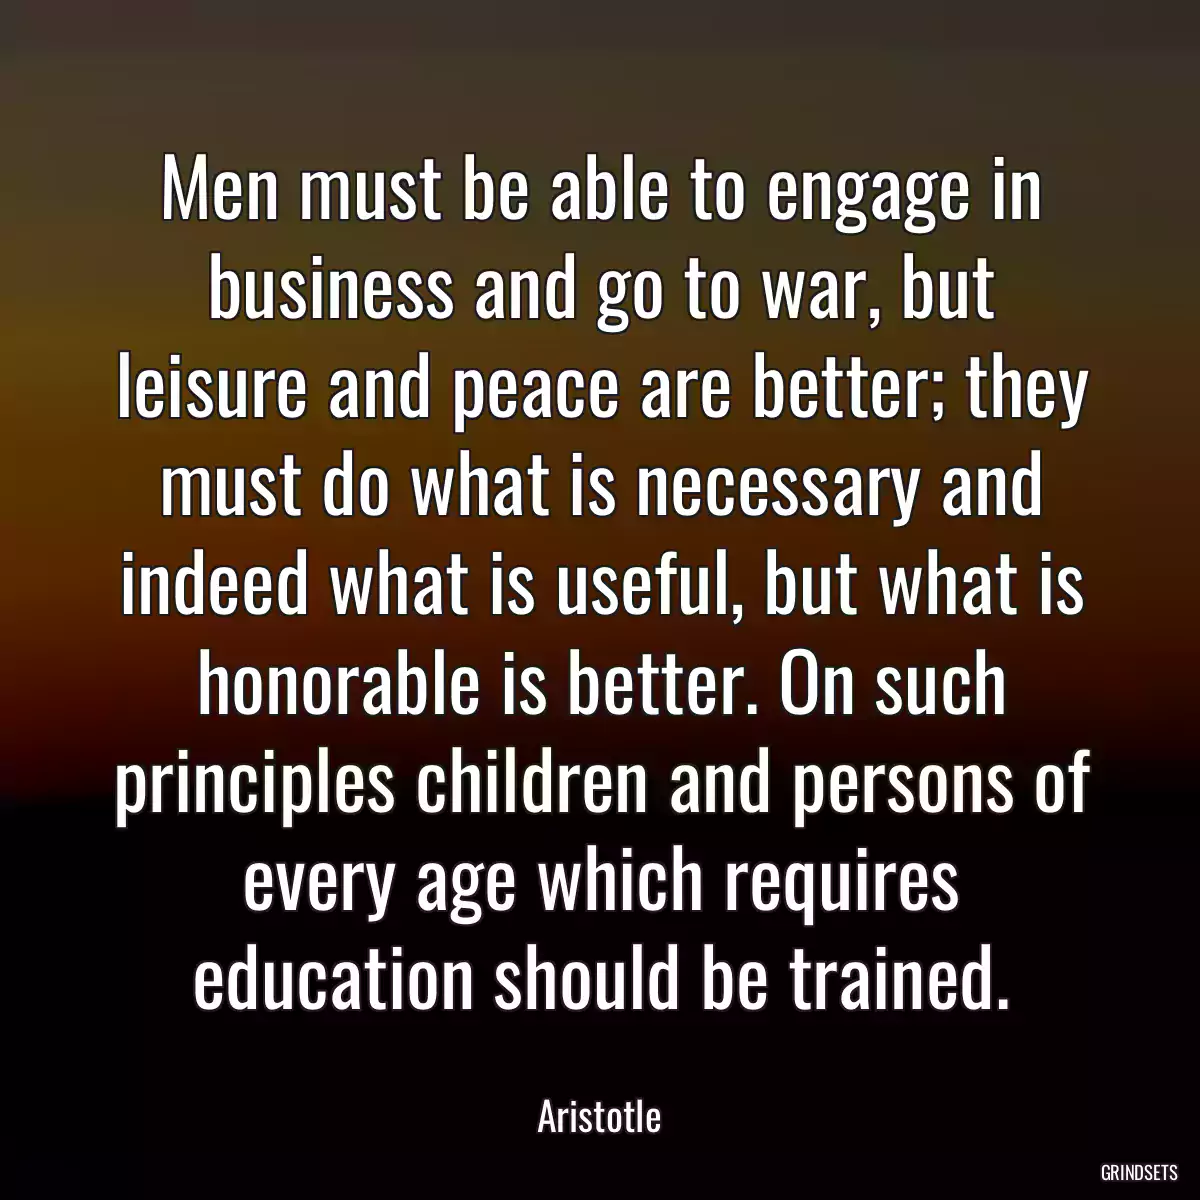 Men must be able to engage in business and go to war, but leisure and peace are better; they must do what is necessary and indeed what is useful, but what is honorable is better. On such principles children and persons of every age which requires education should be trained.